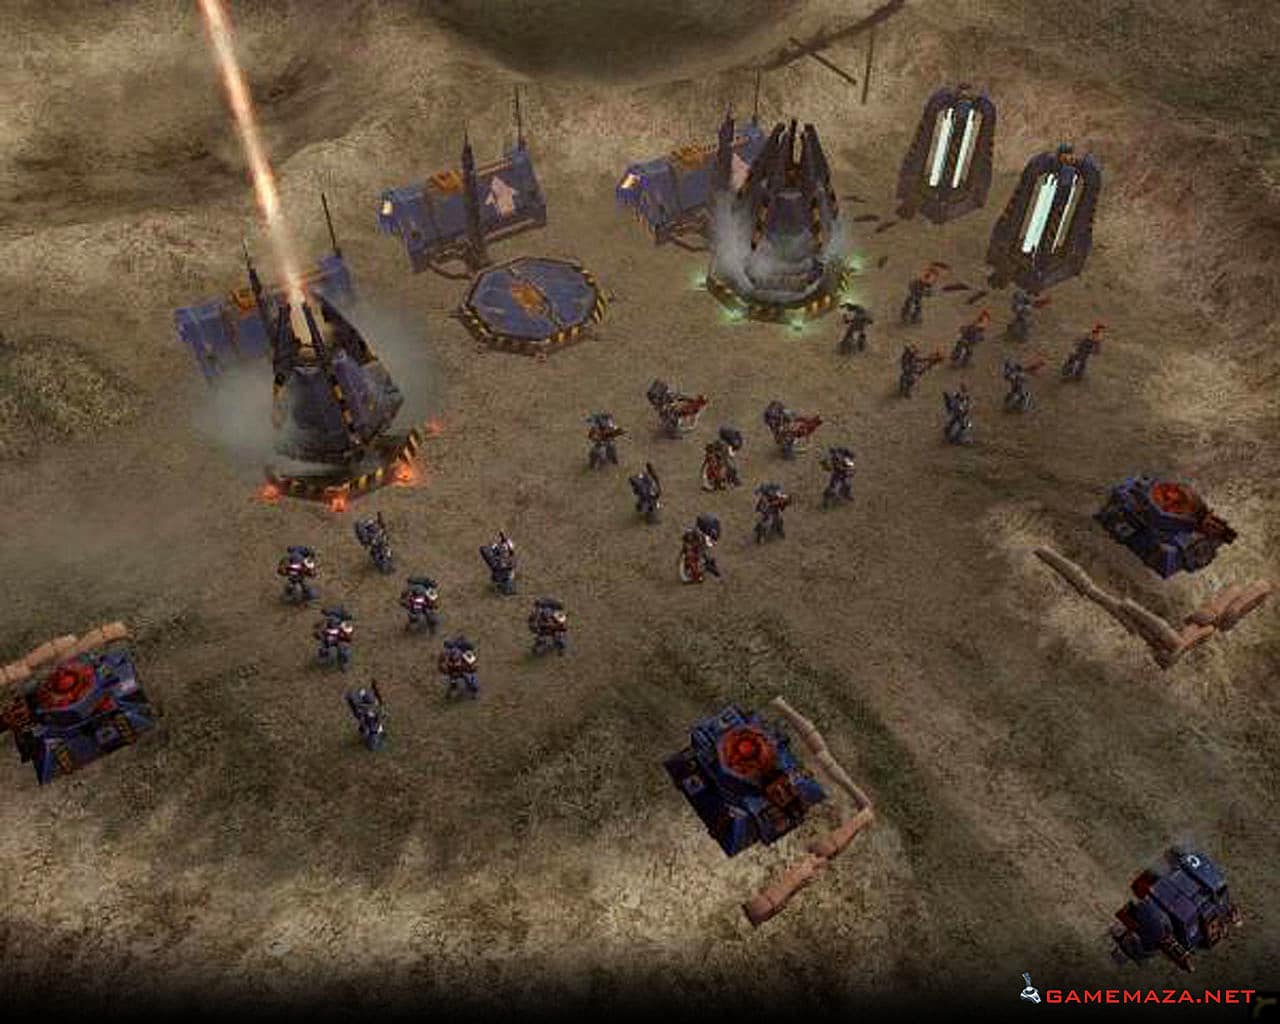 5 Best Warhammer Video Games to Into the